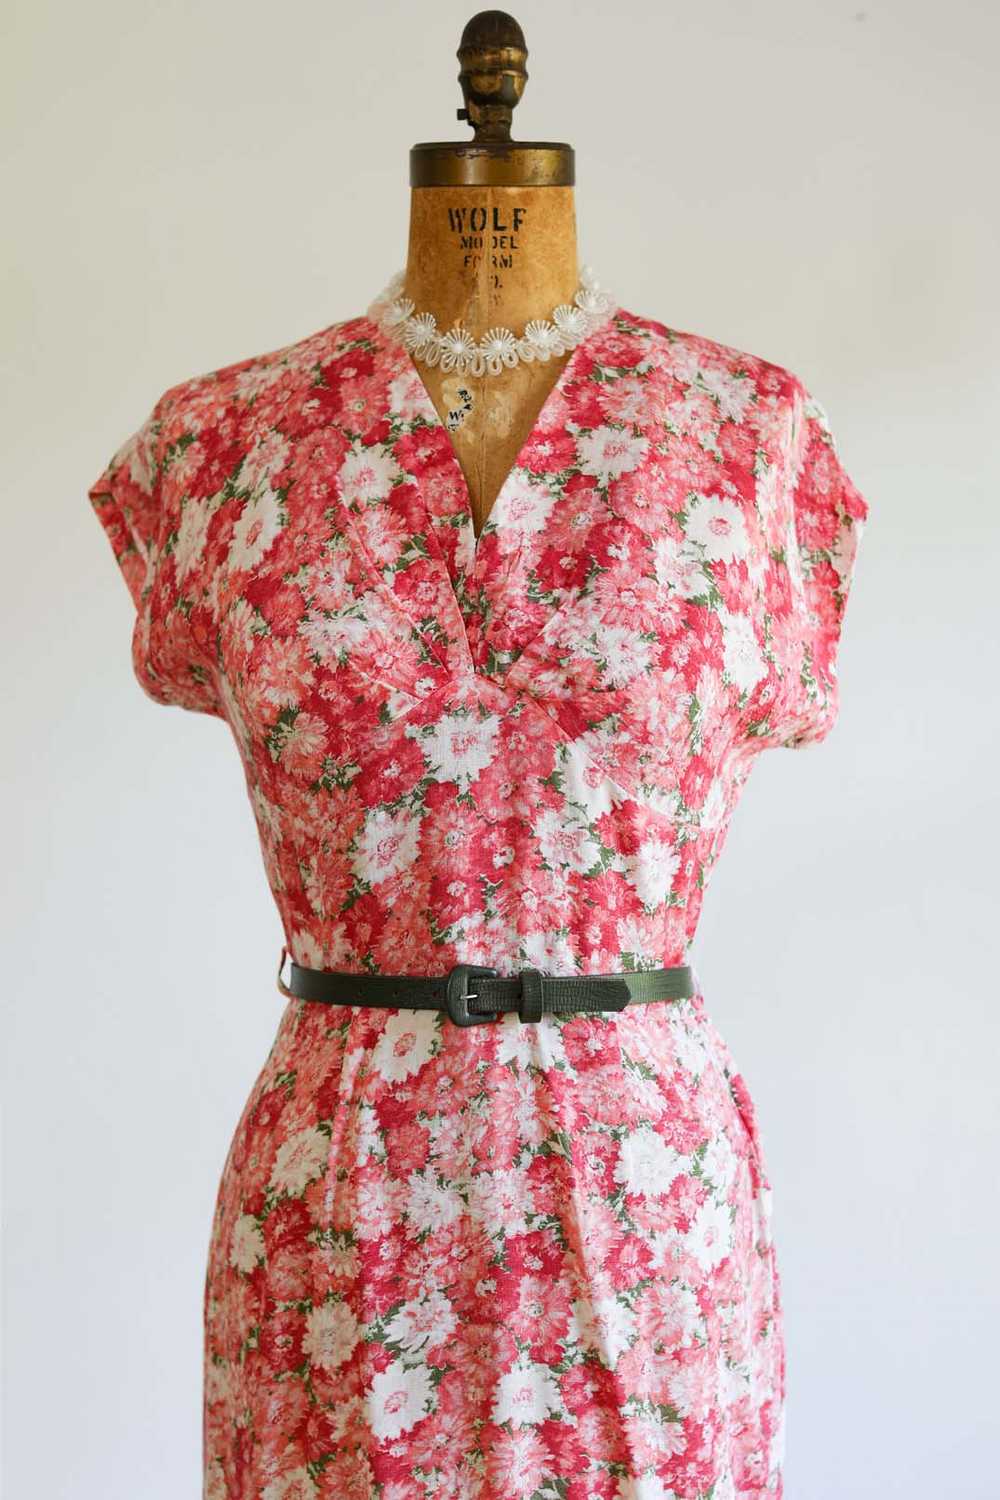 Vintage 1940s to 1950s Dress - STUNNING Gently As… - image 3